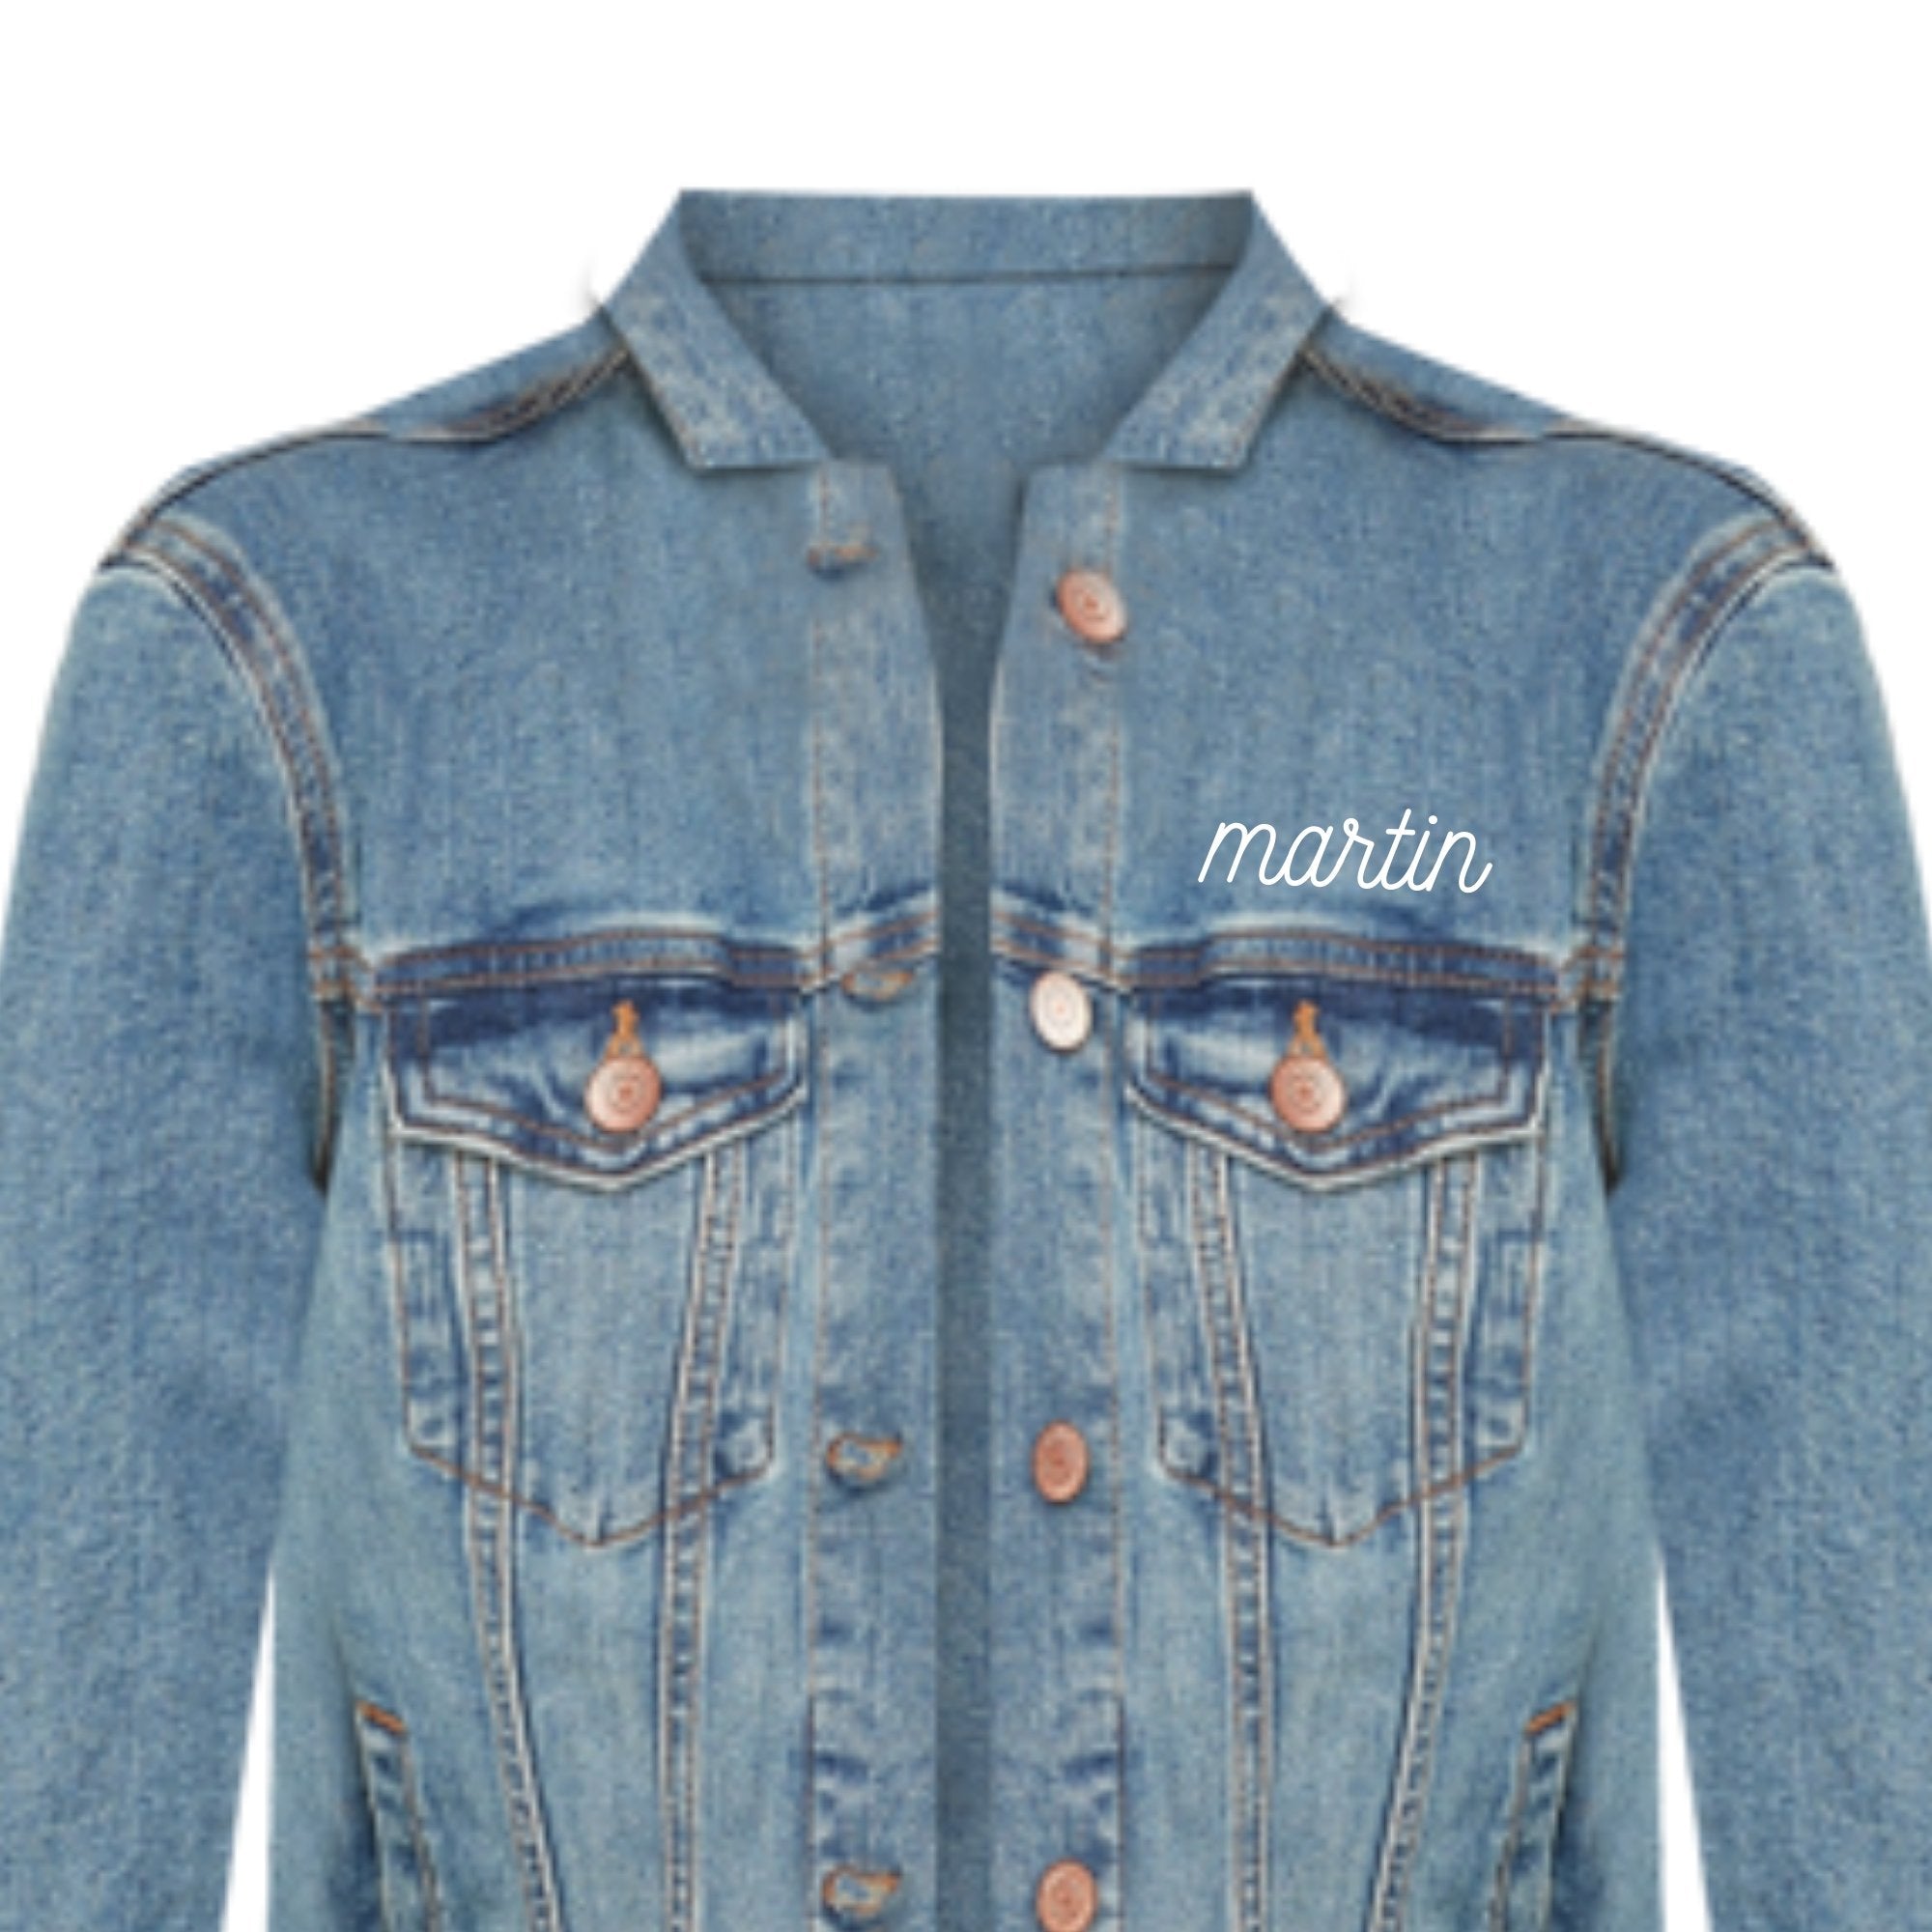 A denim jacket is customized above the pocket with a name in script white font.